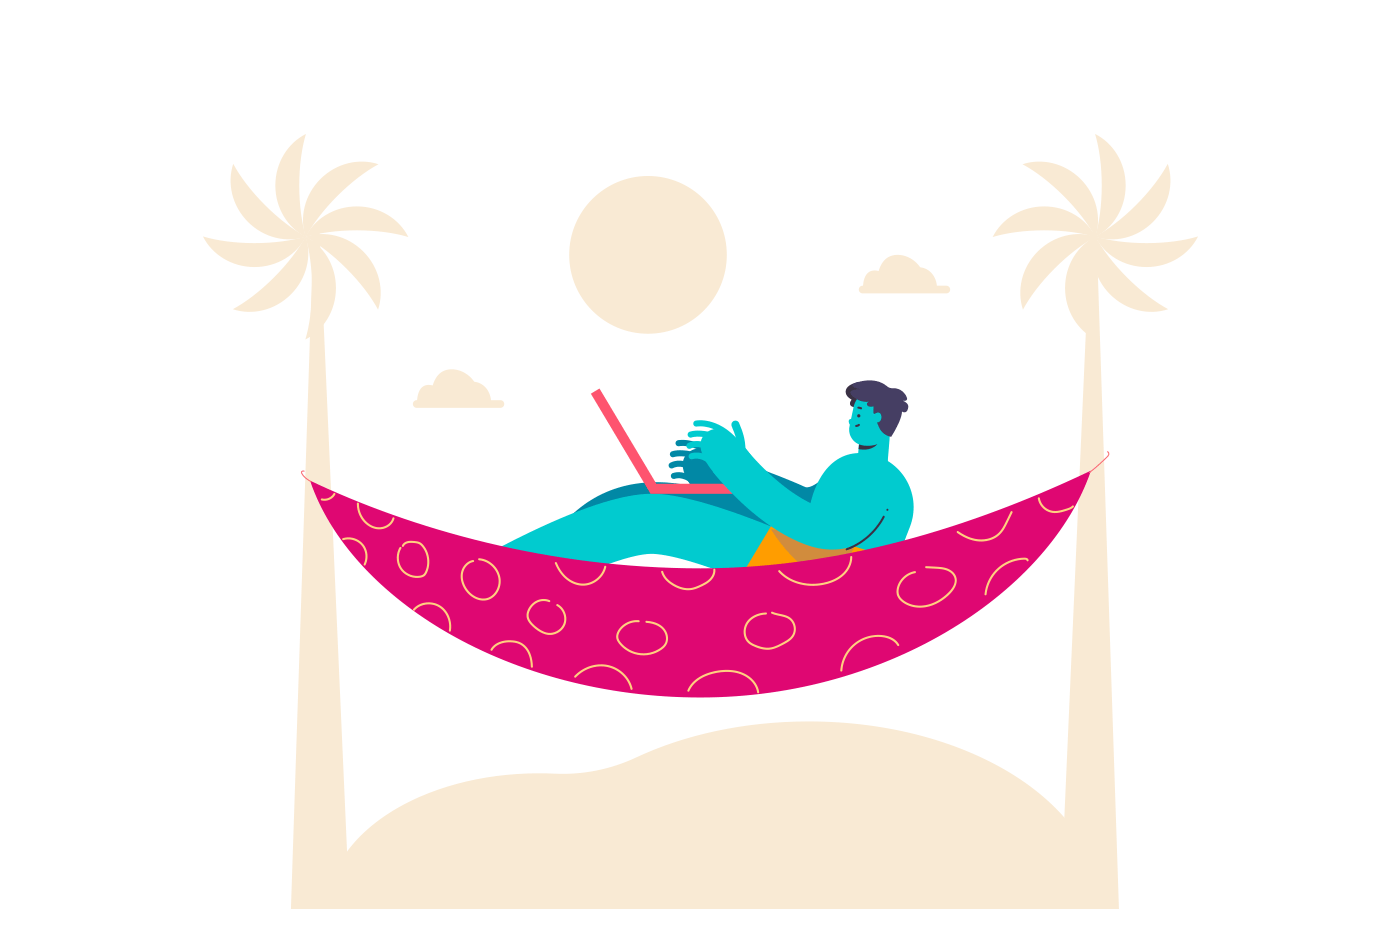 An illustration of a person in a hammock typing on laptop